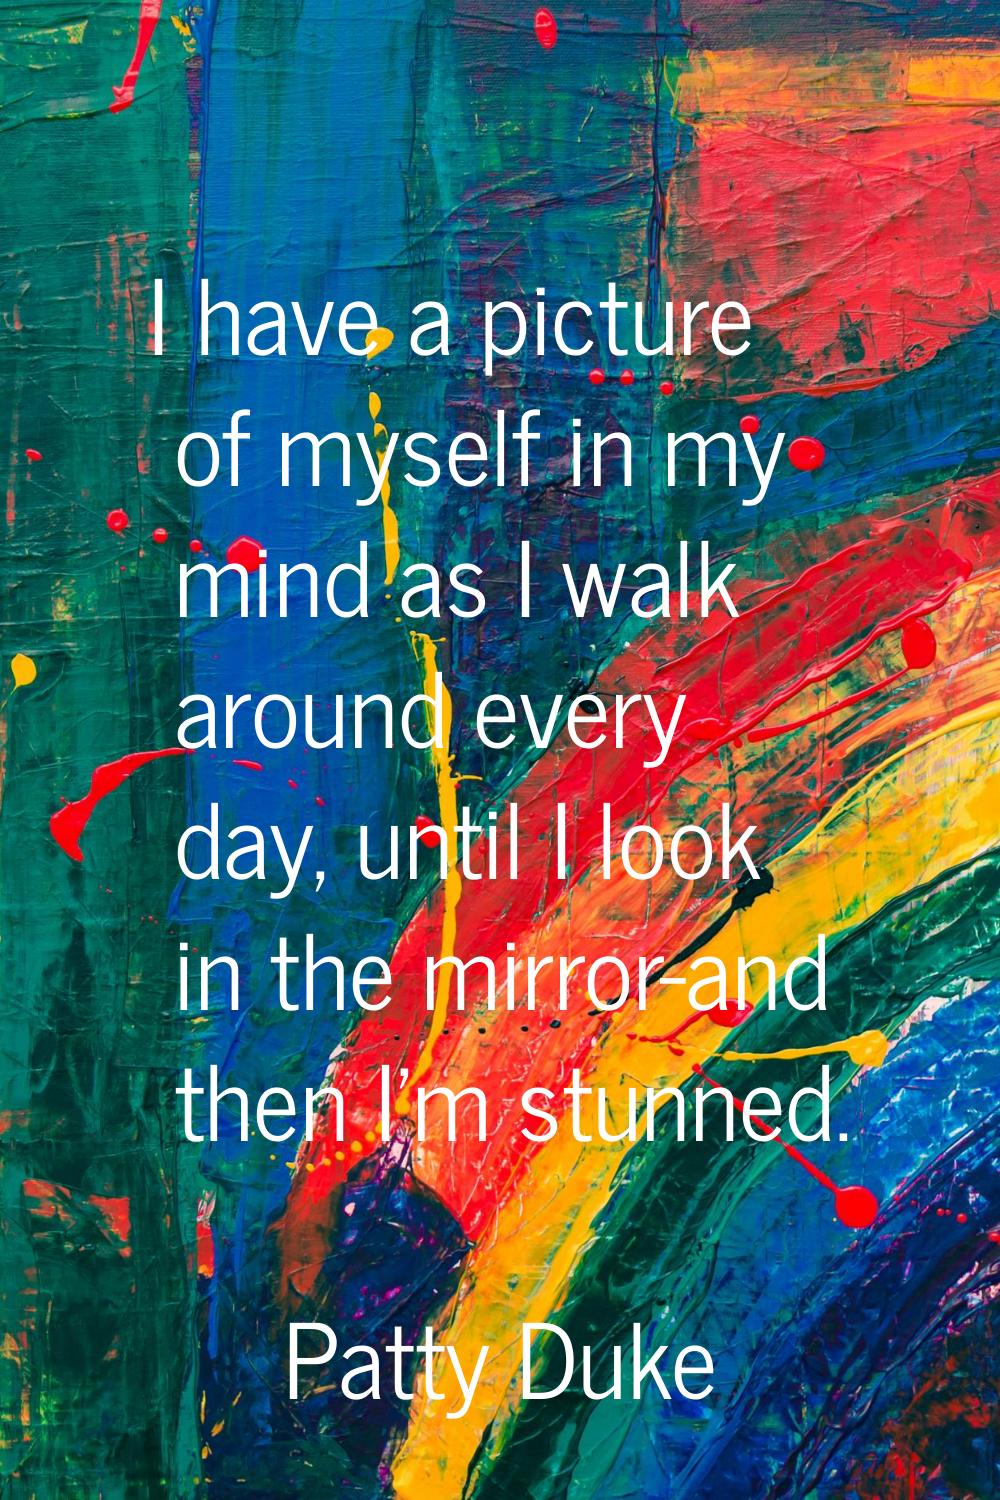 I have a picture of myself in my mind as I walk around every day, until I look in the mirror-and th